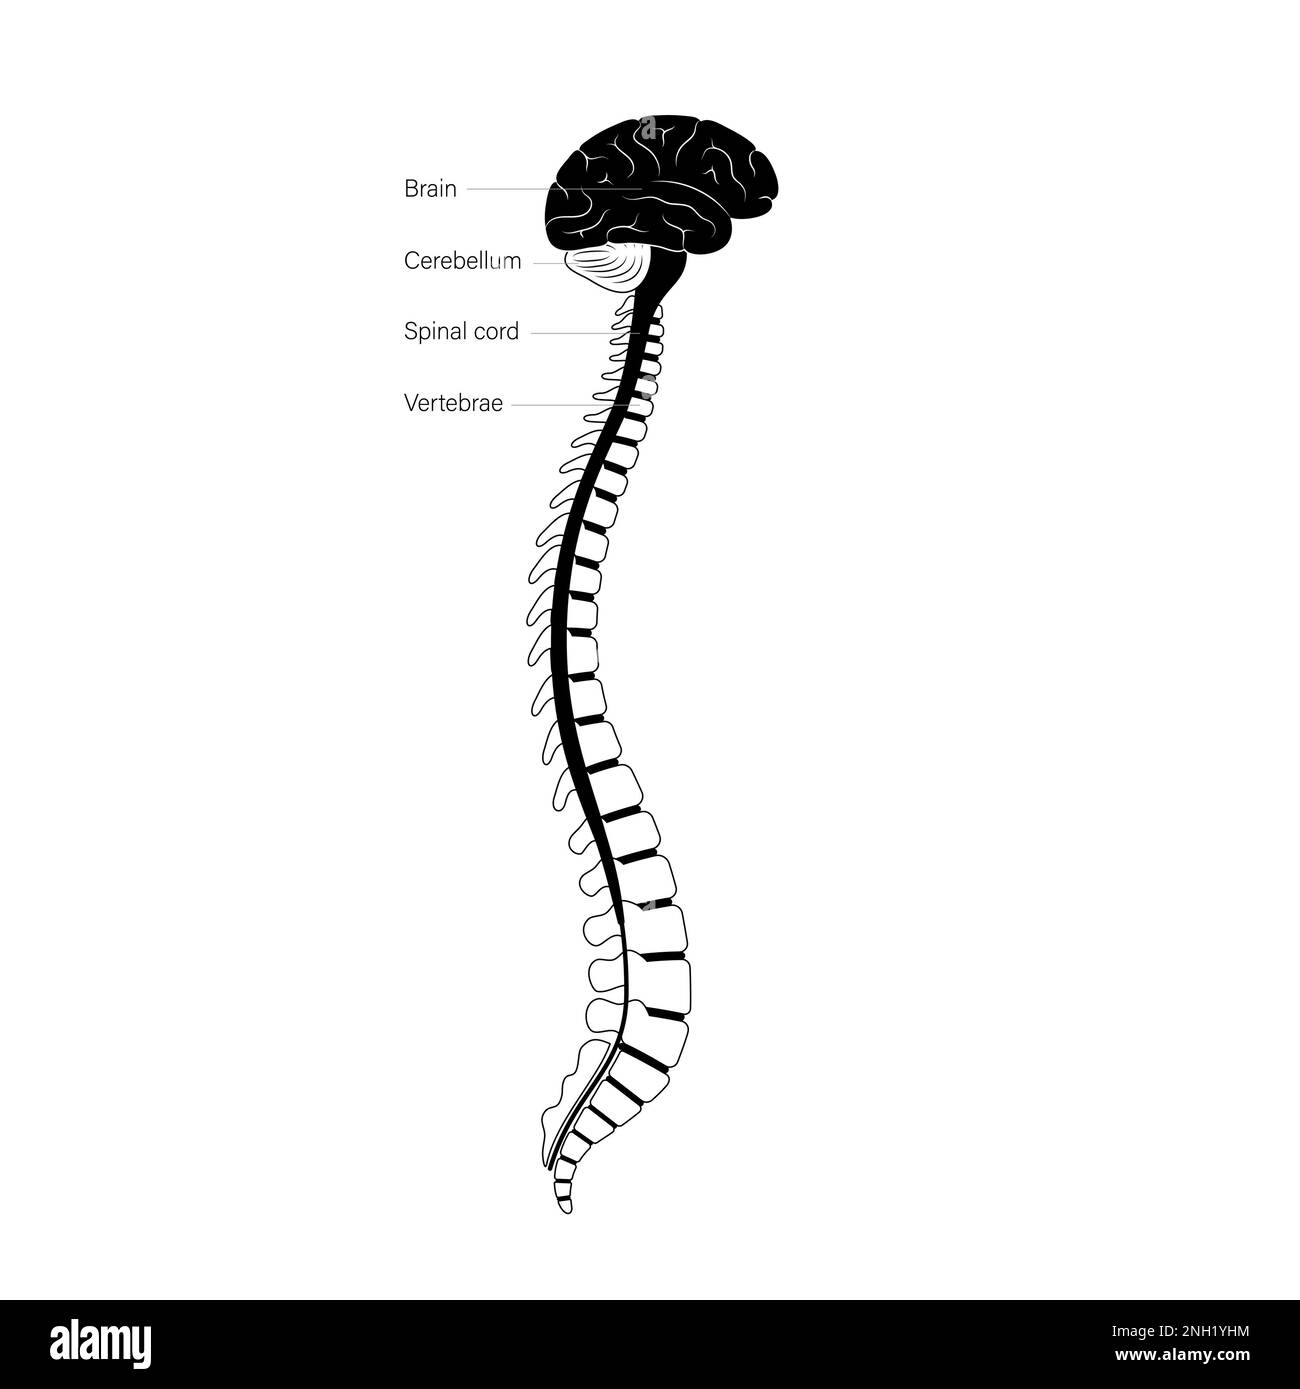 Spinal cord Black and White Stock Photos & Images - Alamy